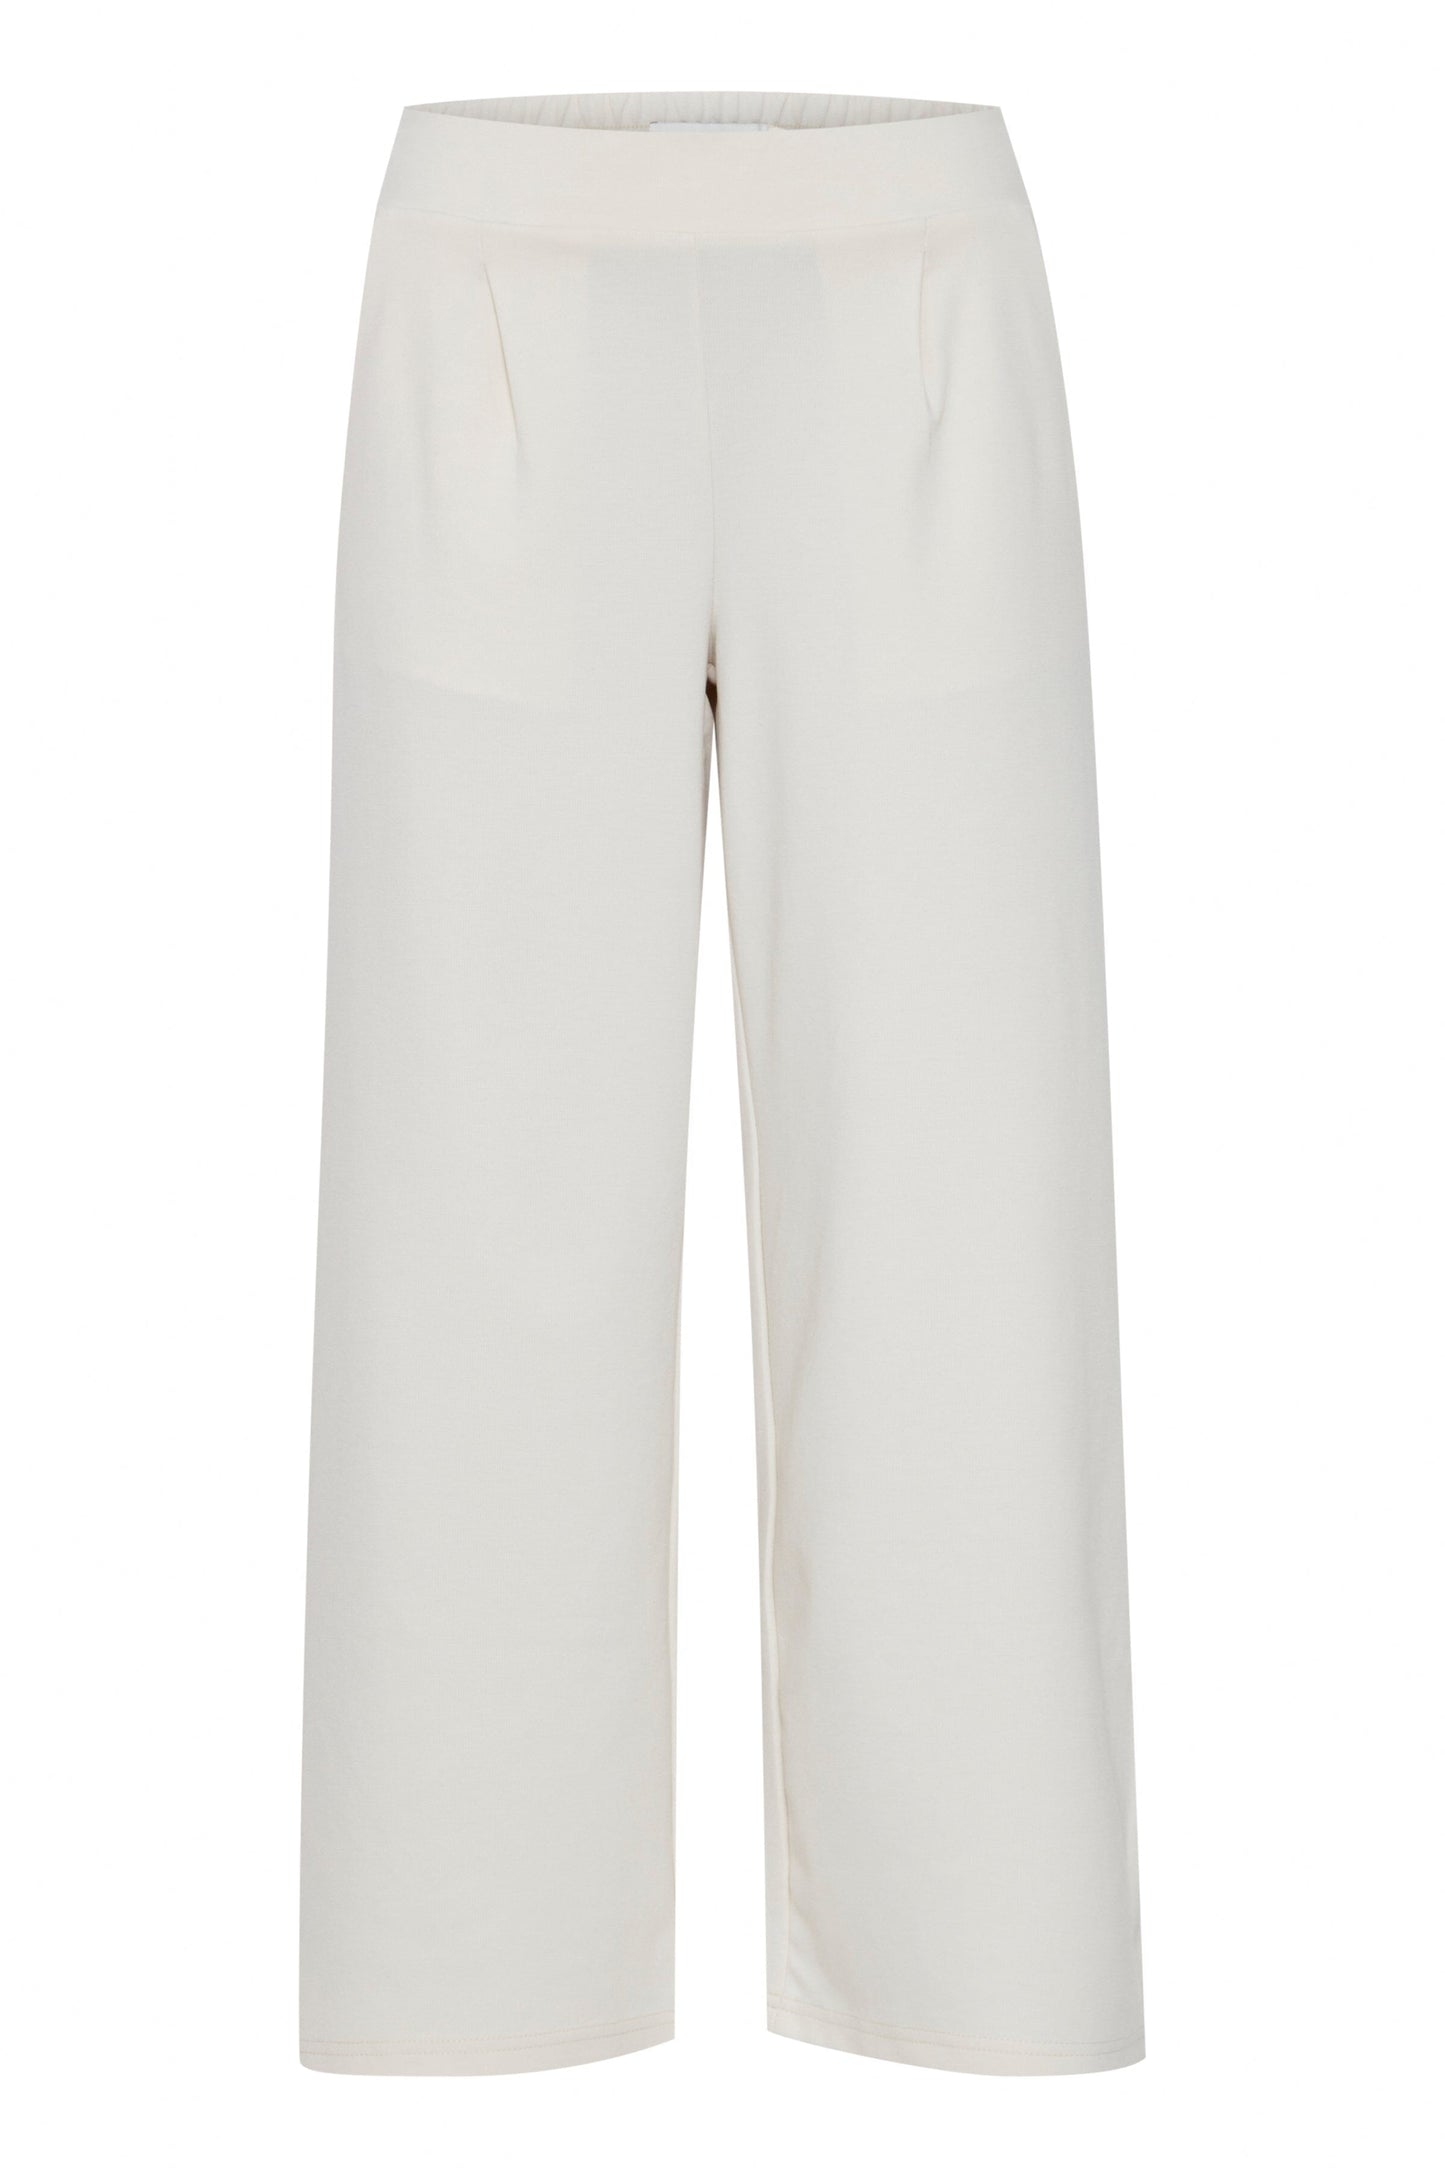 Kate Sus Wide Trousers in Cloud Dancer White Trousers Ichi 